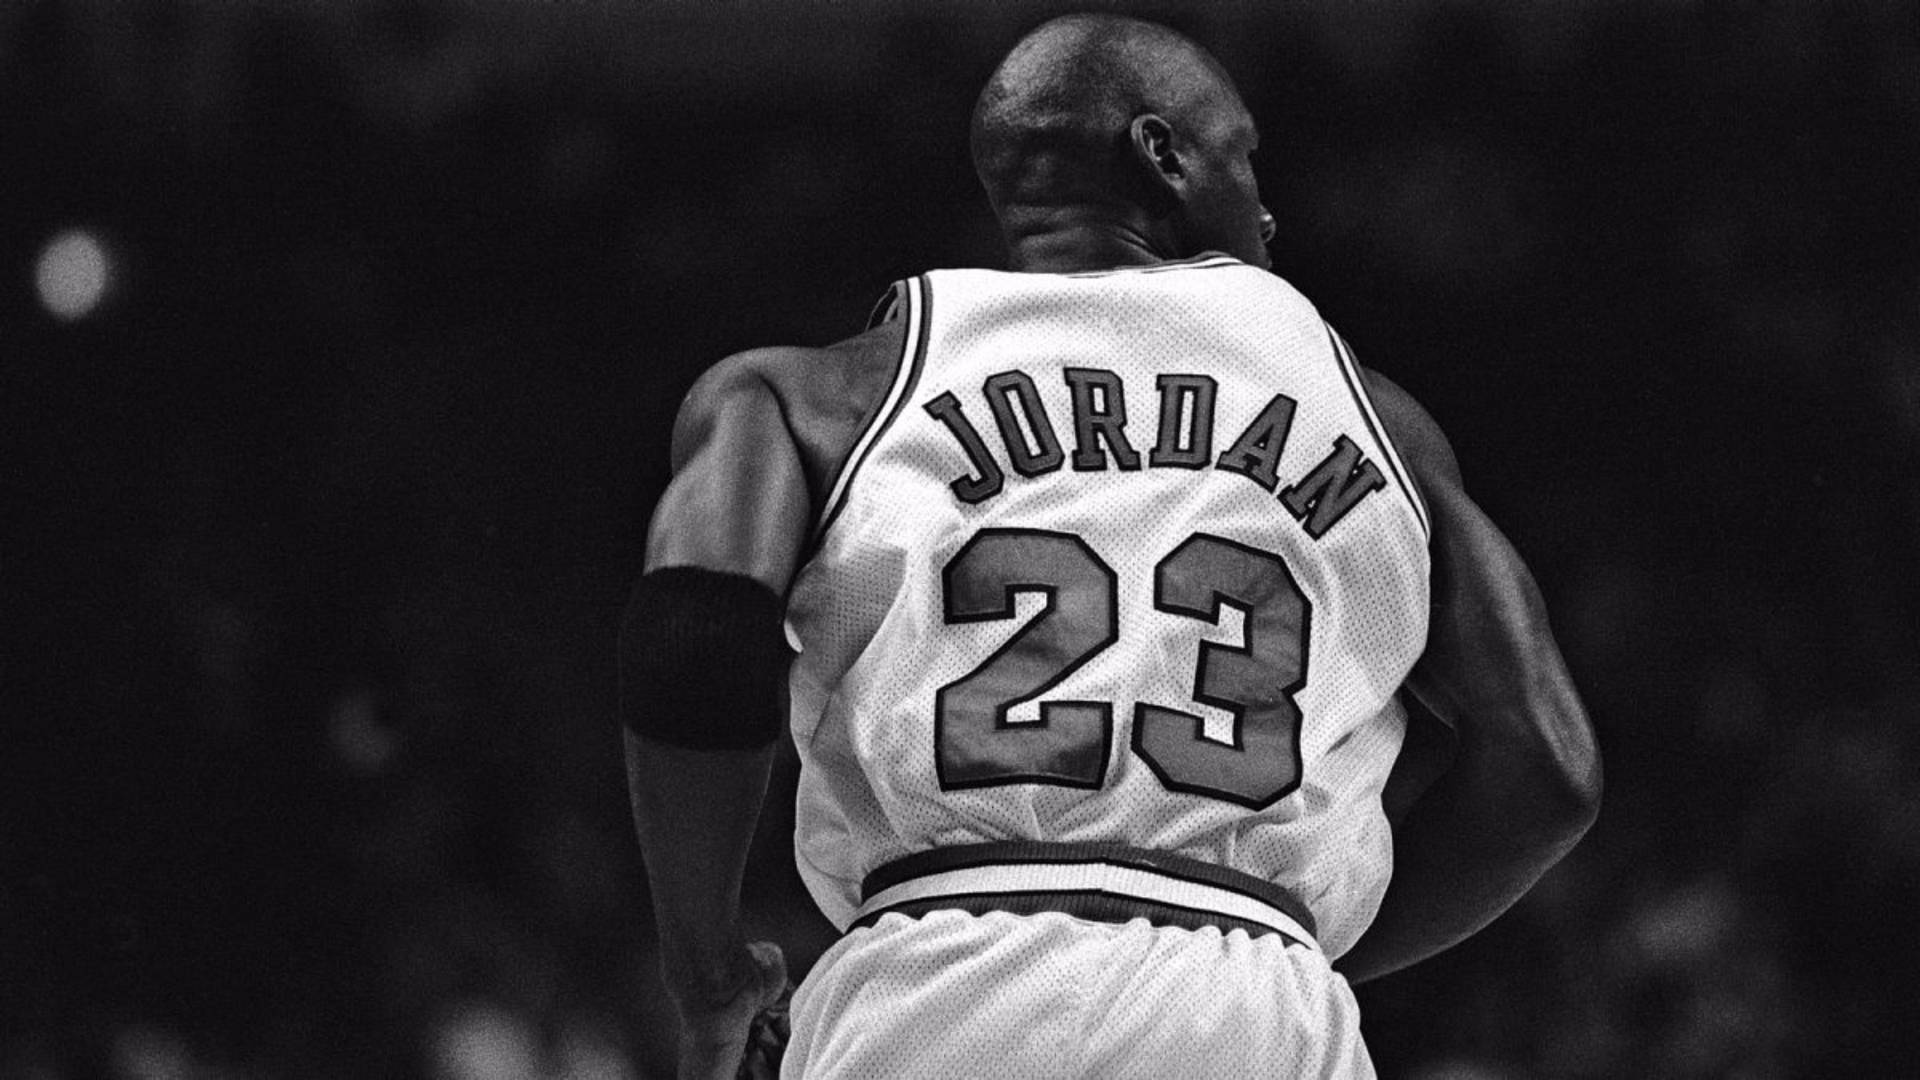 Michael Jordan Hd In Black And White Background